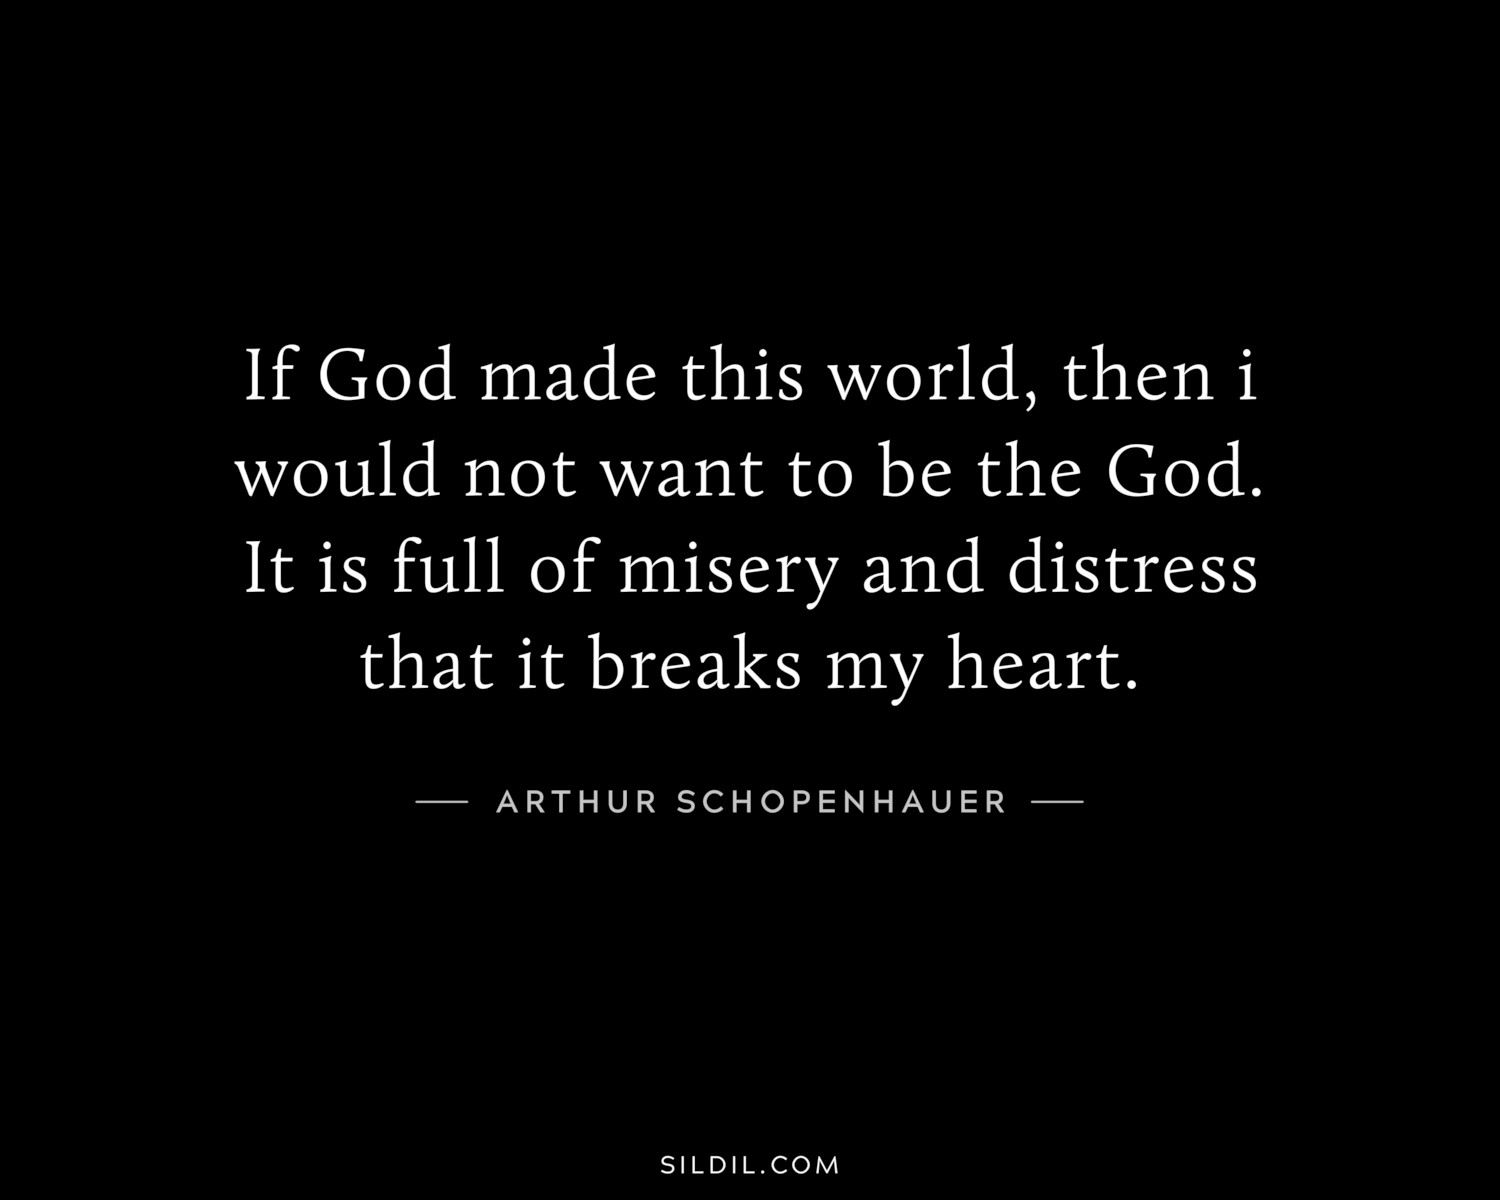 If God made this world, then i would not want to be the God. It is full of misery and distress that it breaks my heart.